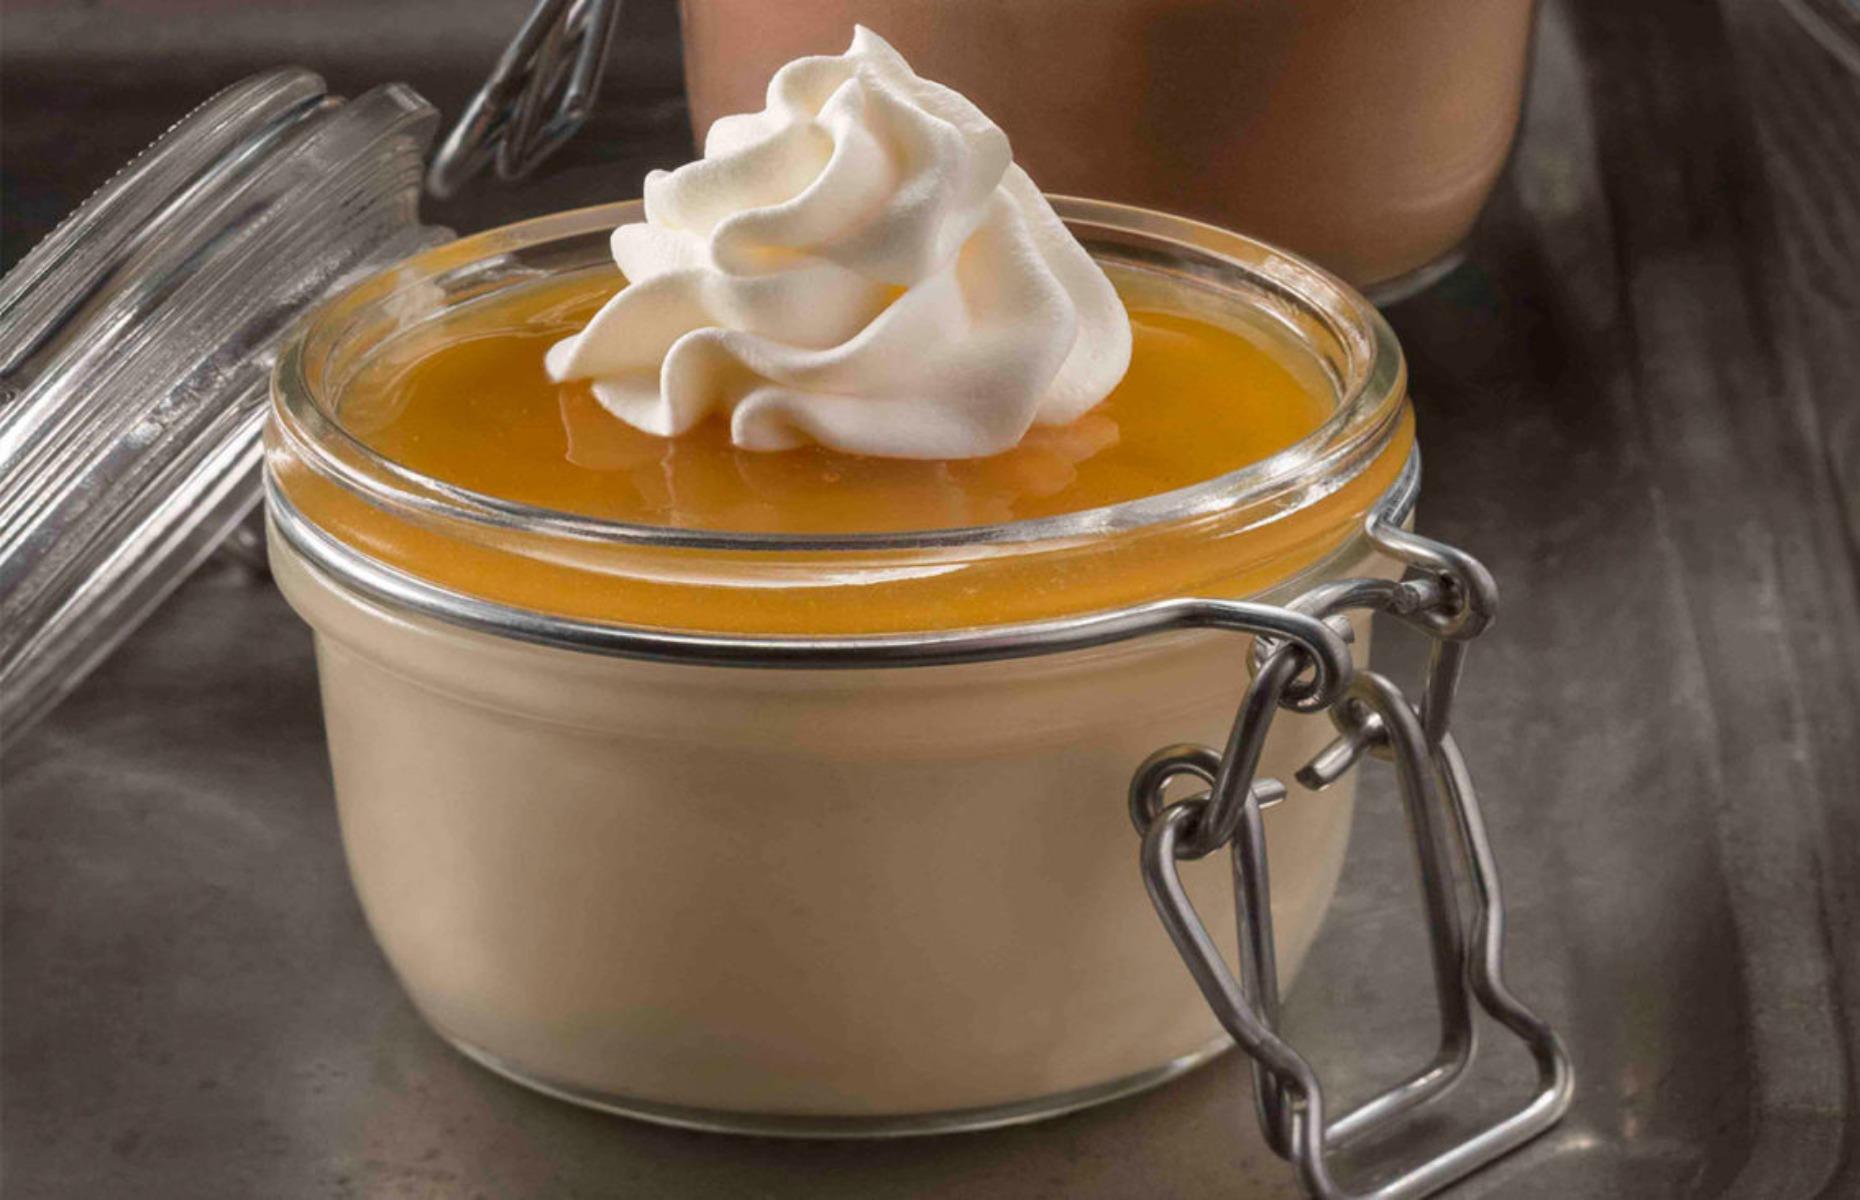 <p>Butterbeer aficionados will love this butterscotch-hued creamy custard also from Universal Studios. Inspired by British clotted cream, Butterbeer Potted Cream is served drizzled with a salty, buttery sauce and presented in a mason jar. A dollop of whipped cream adds a final dash of indulgence.</p>